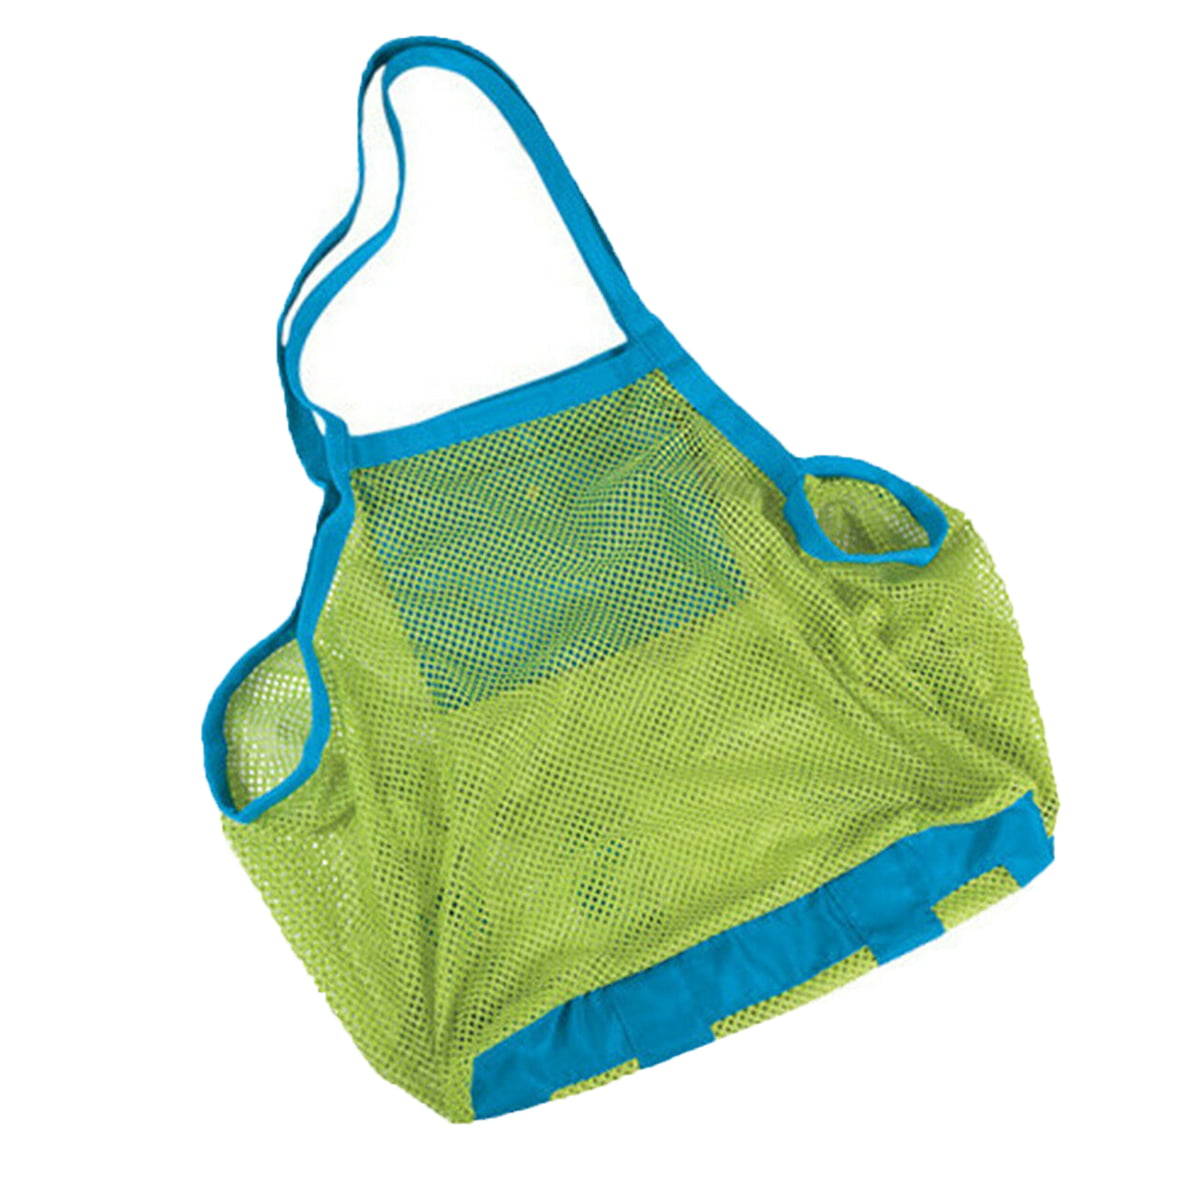 Pop-Up Beach Toy Basket Sand Toy Bag Large Capacity Beach Toy Bag Fenlosi Heavy Mesh Beach Tote Bag Used to Store Beach Toys and Towels Blue Shell Bag